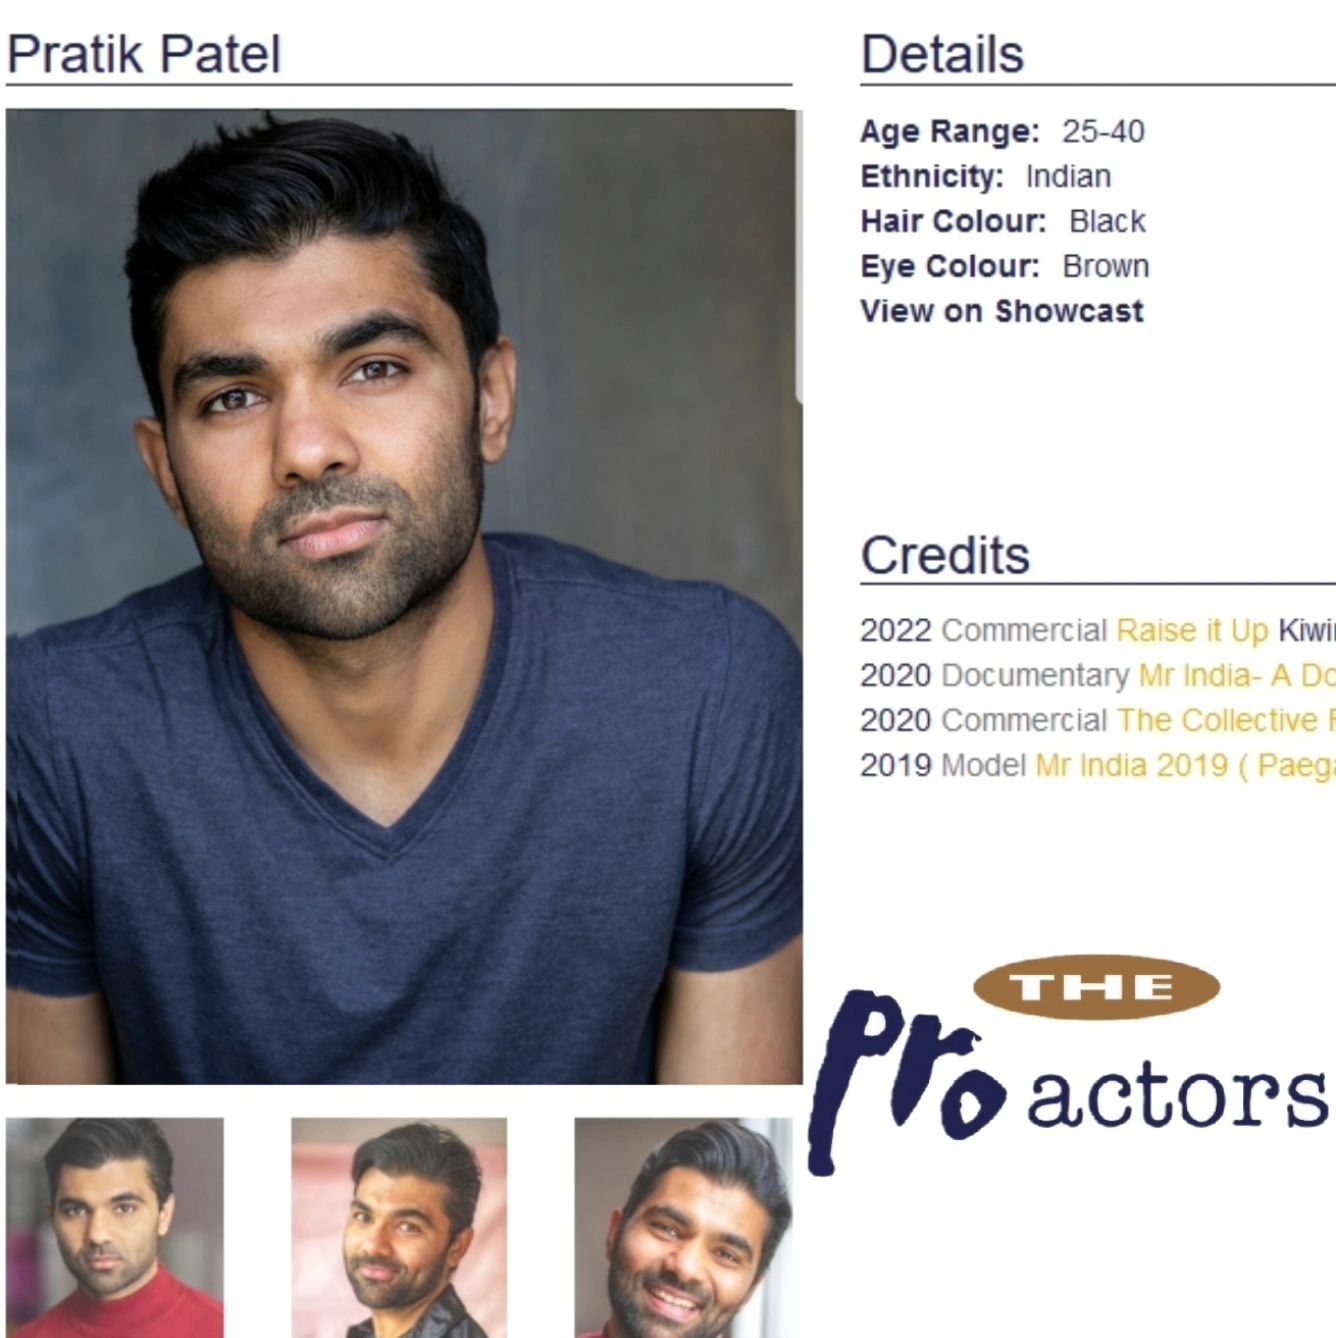 A New Chapter begins with The Proactors- My New Acting Agent 🌟
&nbsp;

Namaskar Fam 🙏🏽

Delighted to announce the newest chapter in my acting journey&mdash;I've just joined The Proactors!&nbsp;🎭✨&nbsp;Excited to delve into new opportunities&nbsp;